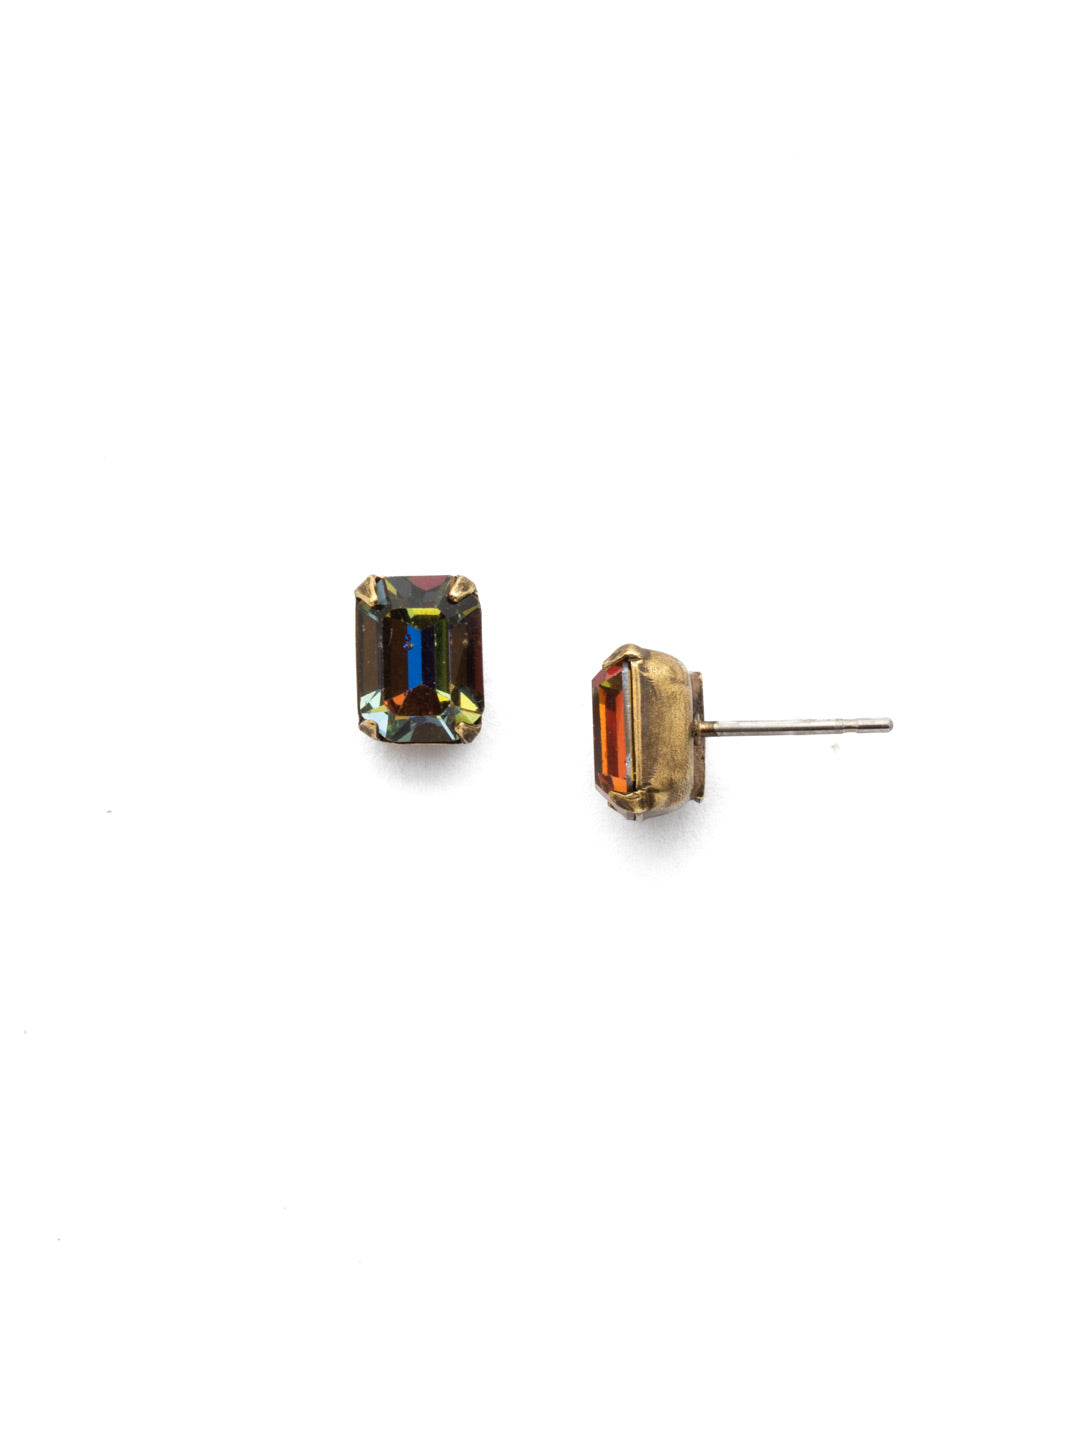 Mini Emerald Cut Stud Earrings - EBY42AGVO - <p>Simply sophisticated. The mini emerald cut stud earrings can be worn alone or paired with anything for an extra accent to any wardrobe. From Sorrelli's Volcano collection in our Antique Gold-tone finish.</p>